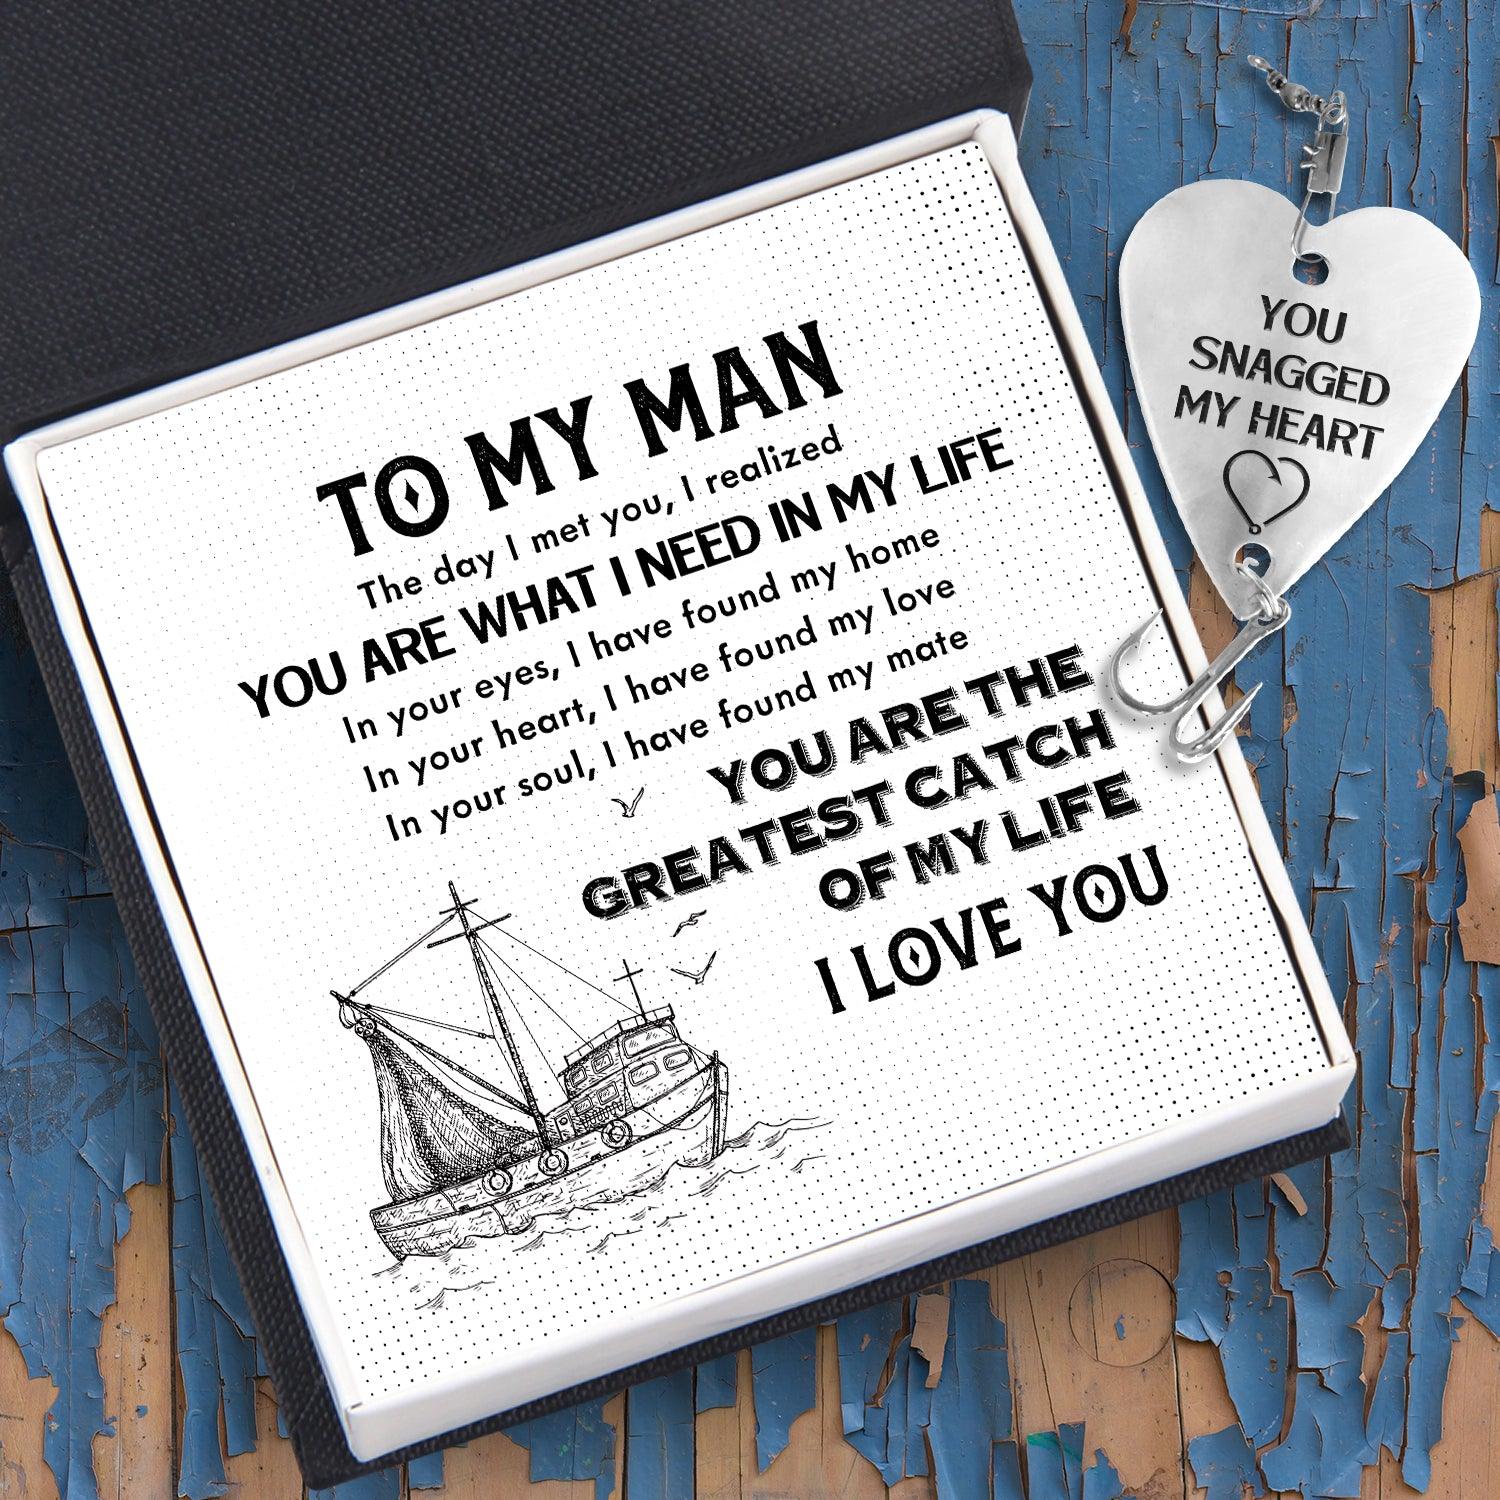 Heart Fishing Lure - Fishing - To My Man - You Are The Greatest Catch Of My Life - Augfc26005 - Gifts Holder